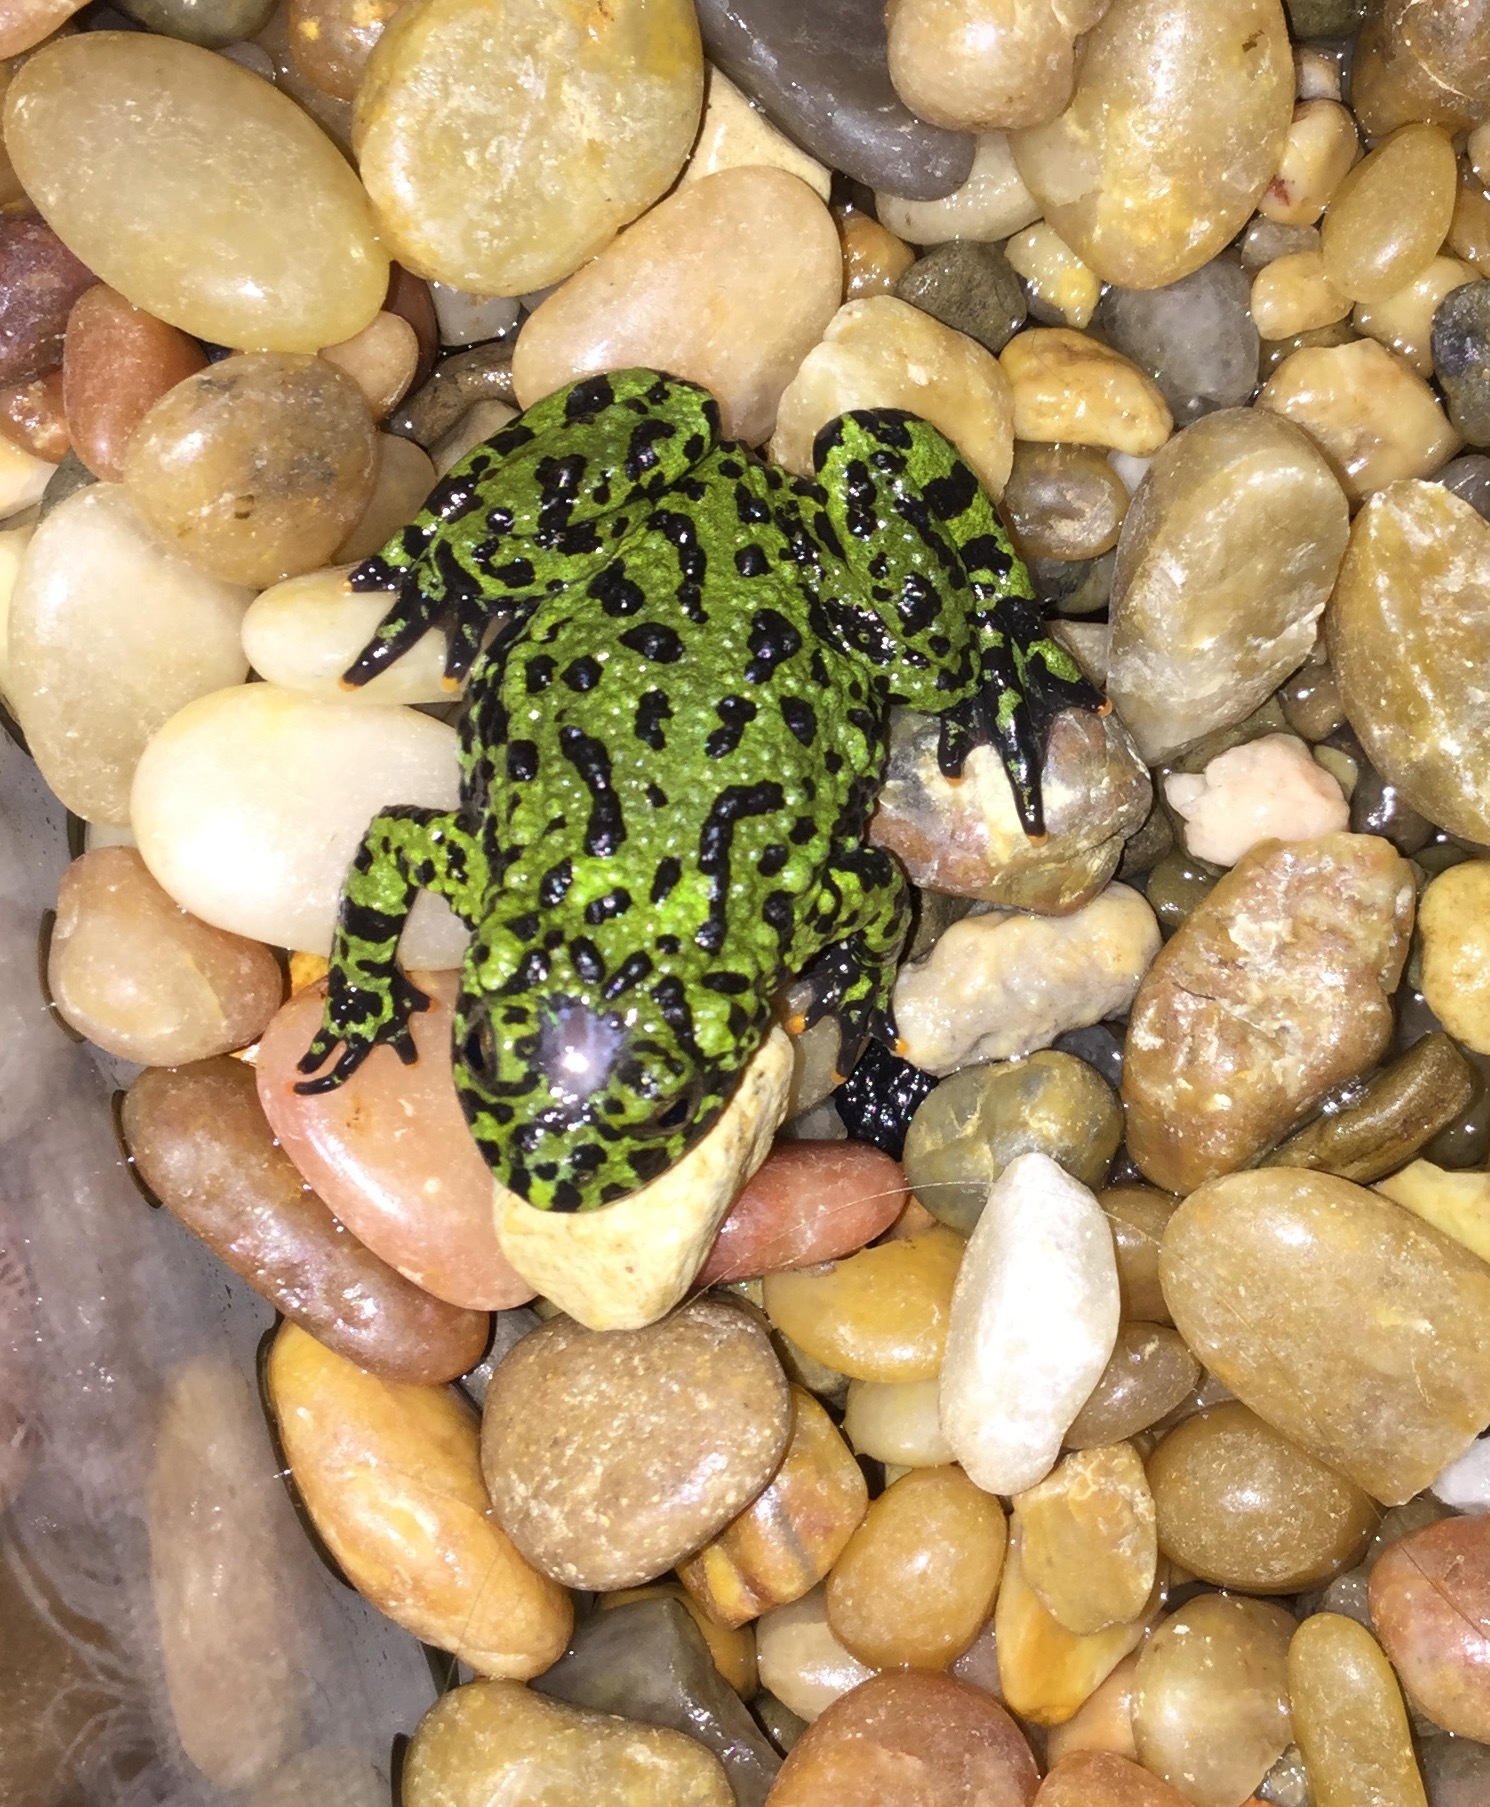 Fire Belly Toad has a White/Grey Spot on Head - Ask an Expert